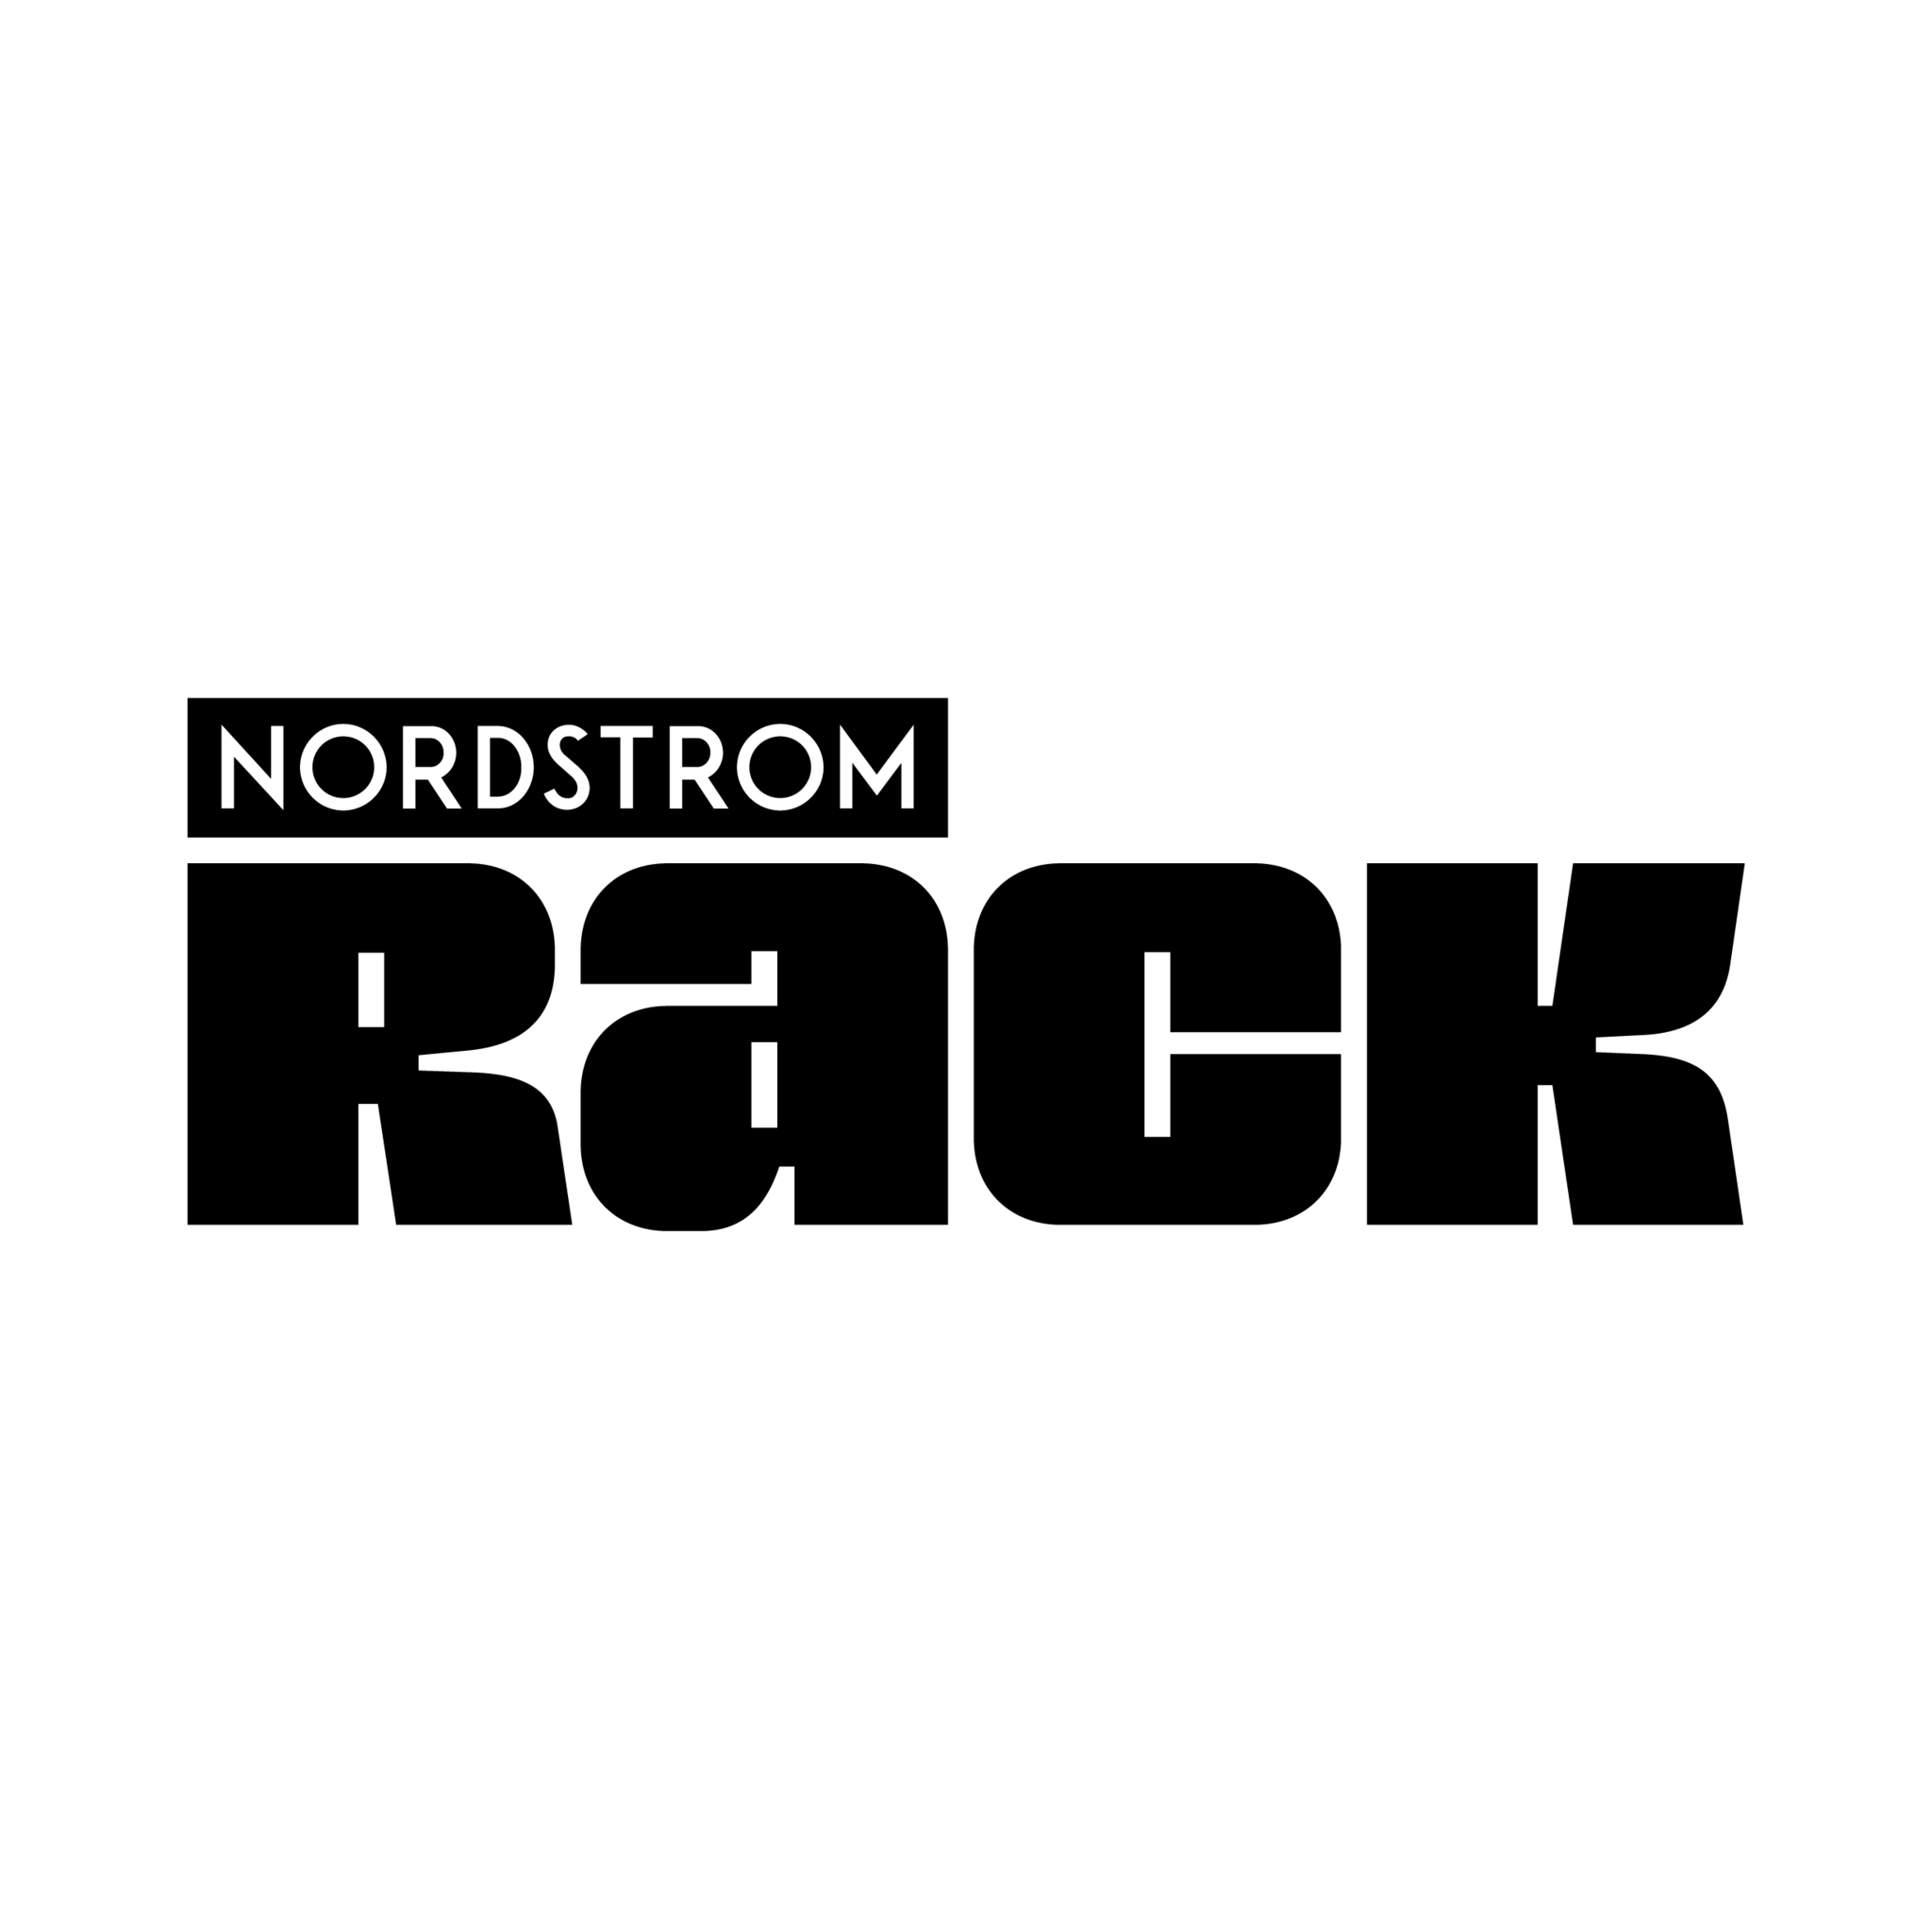 Nordstrom Rack opens today in West Des Moines